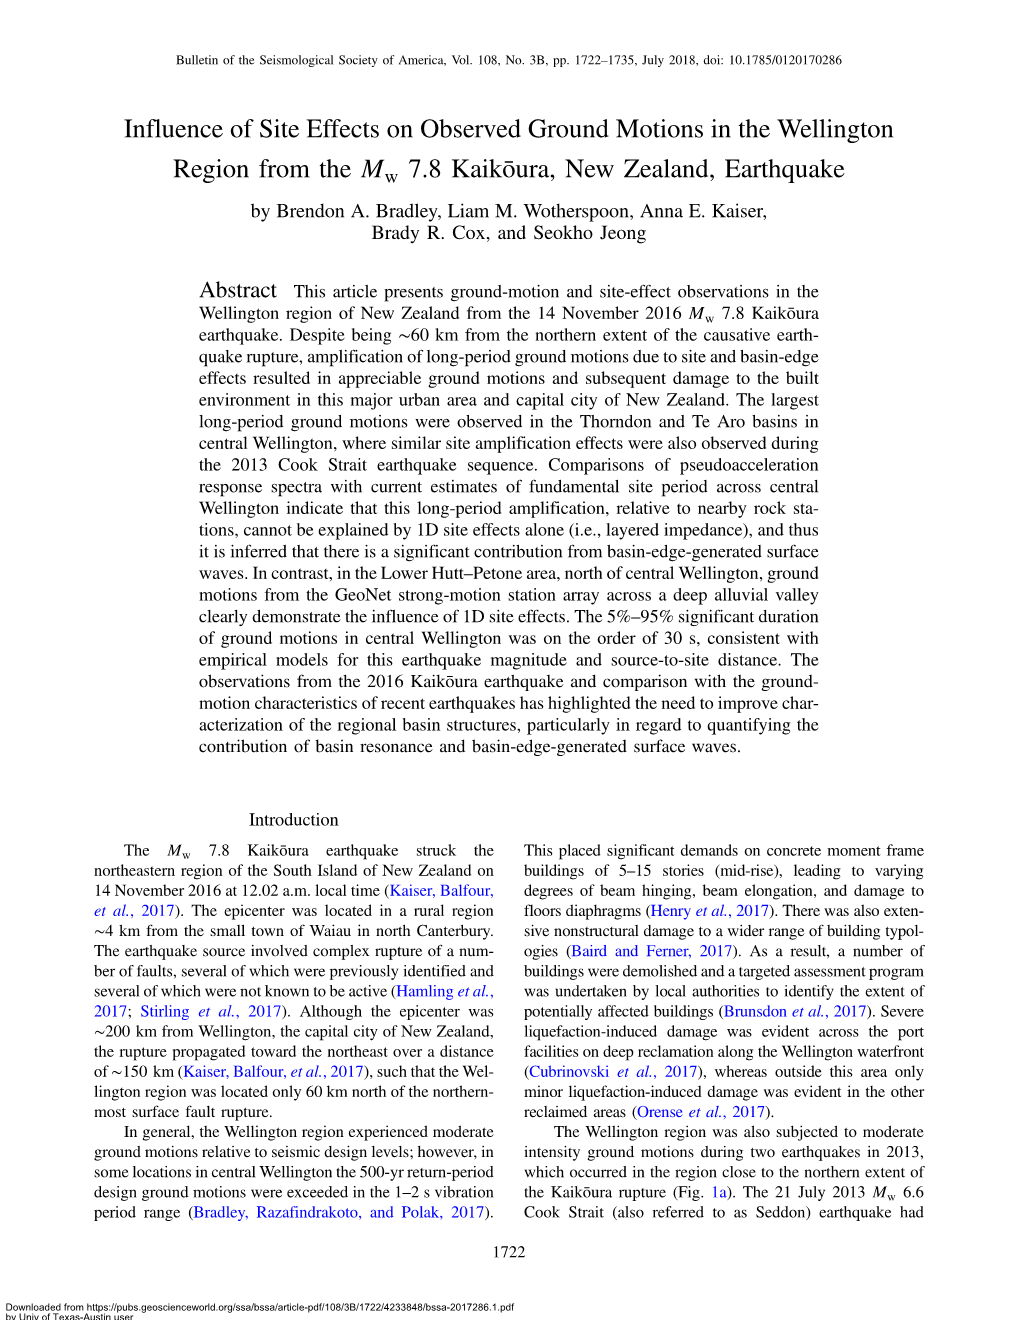 Influence of Site Effects on Observed Ground Motions in the Wellington Region from the Mw 7.8 Kaikōura, New Zealand, Earthquake